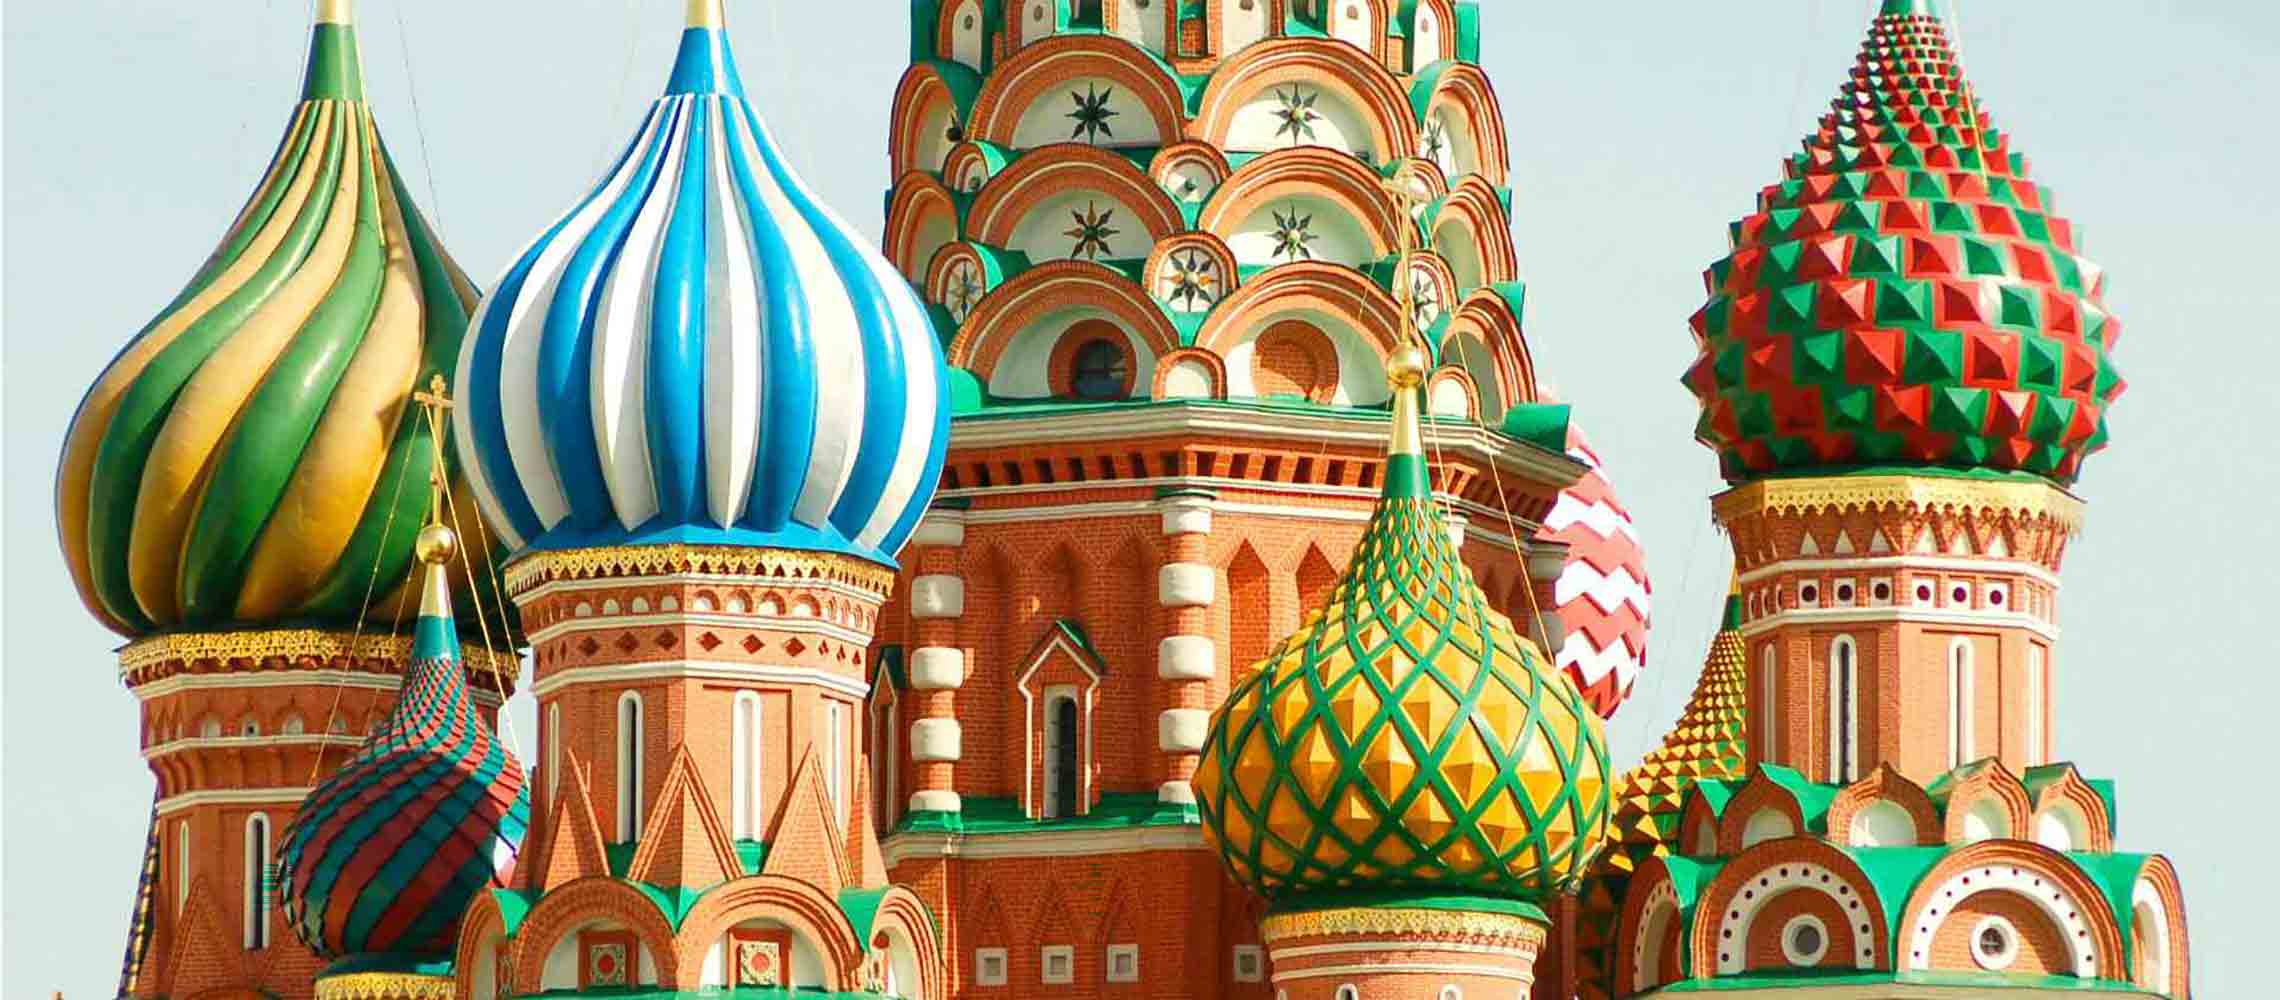 Russia_Moscow_St_Basil's_Cathedral_2280_2